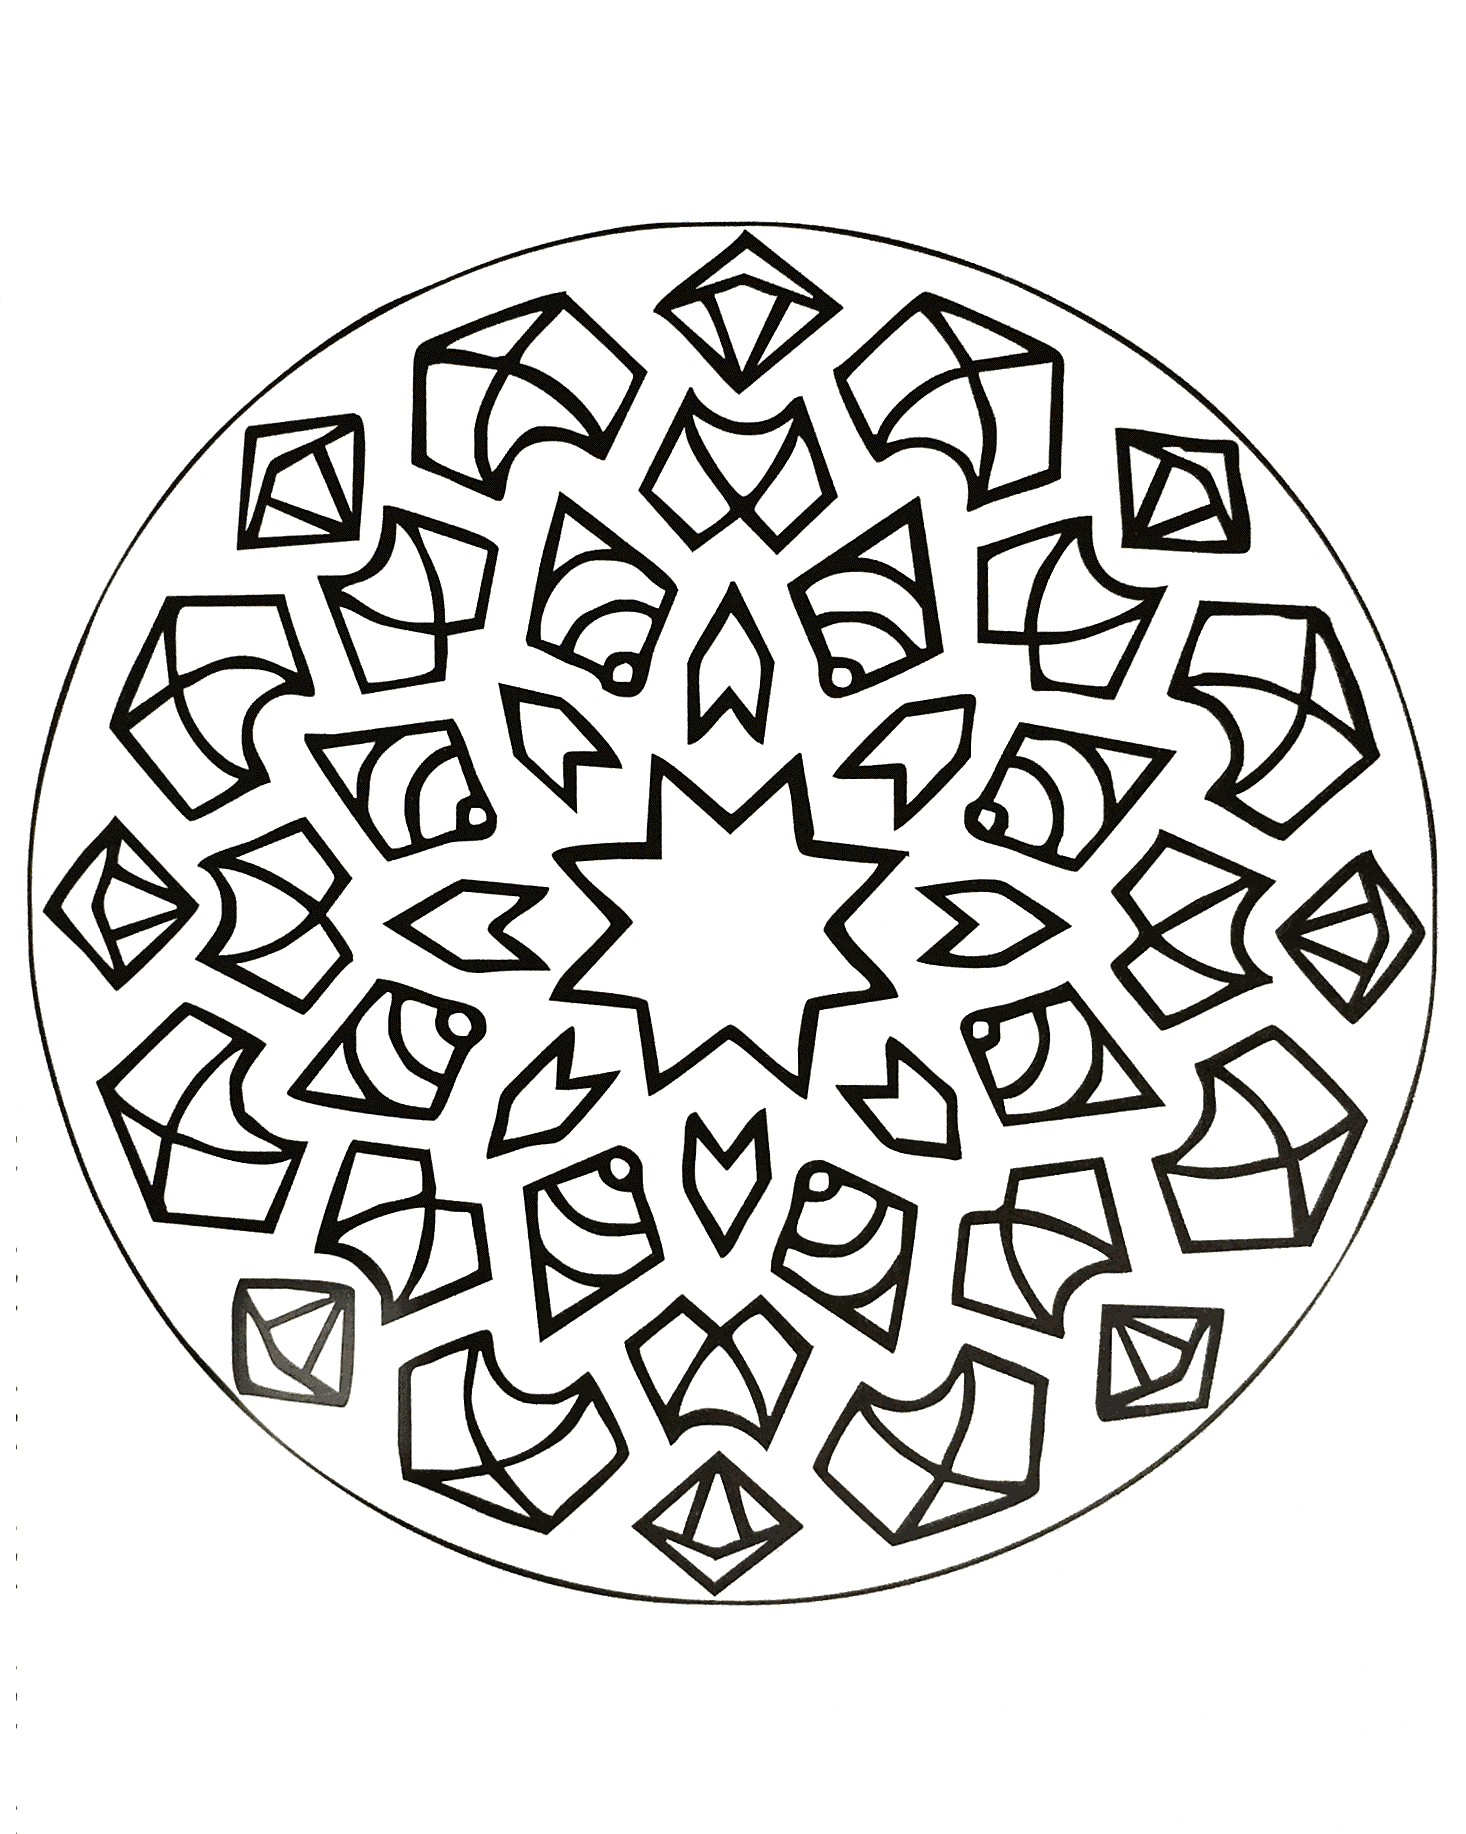 Mandalas to download for free - 17 - Image with : Star